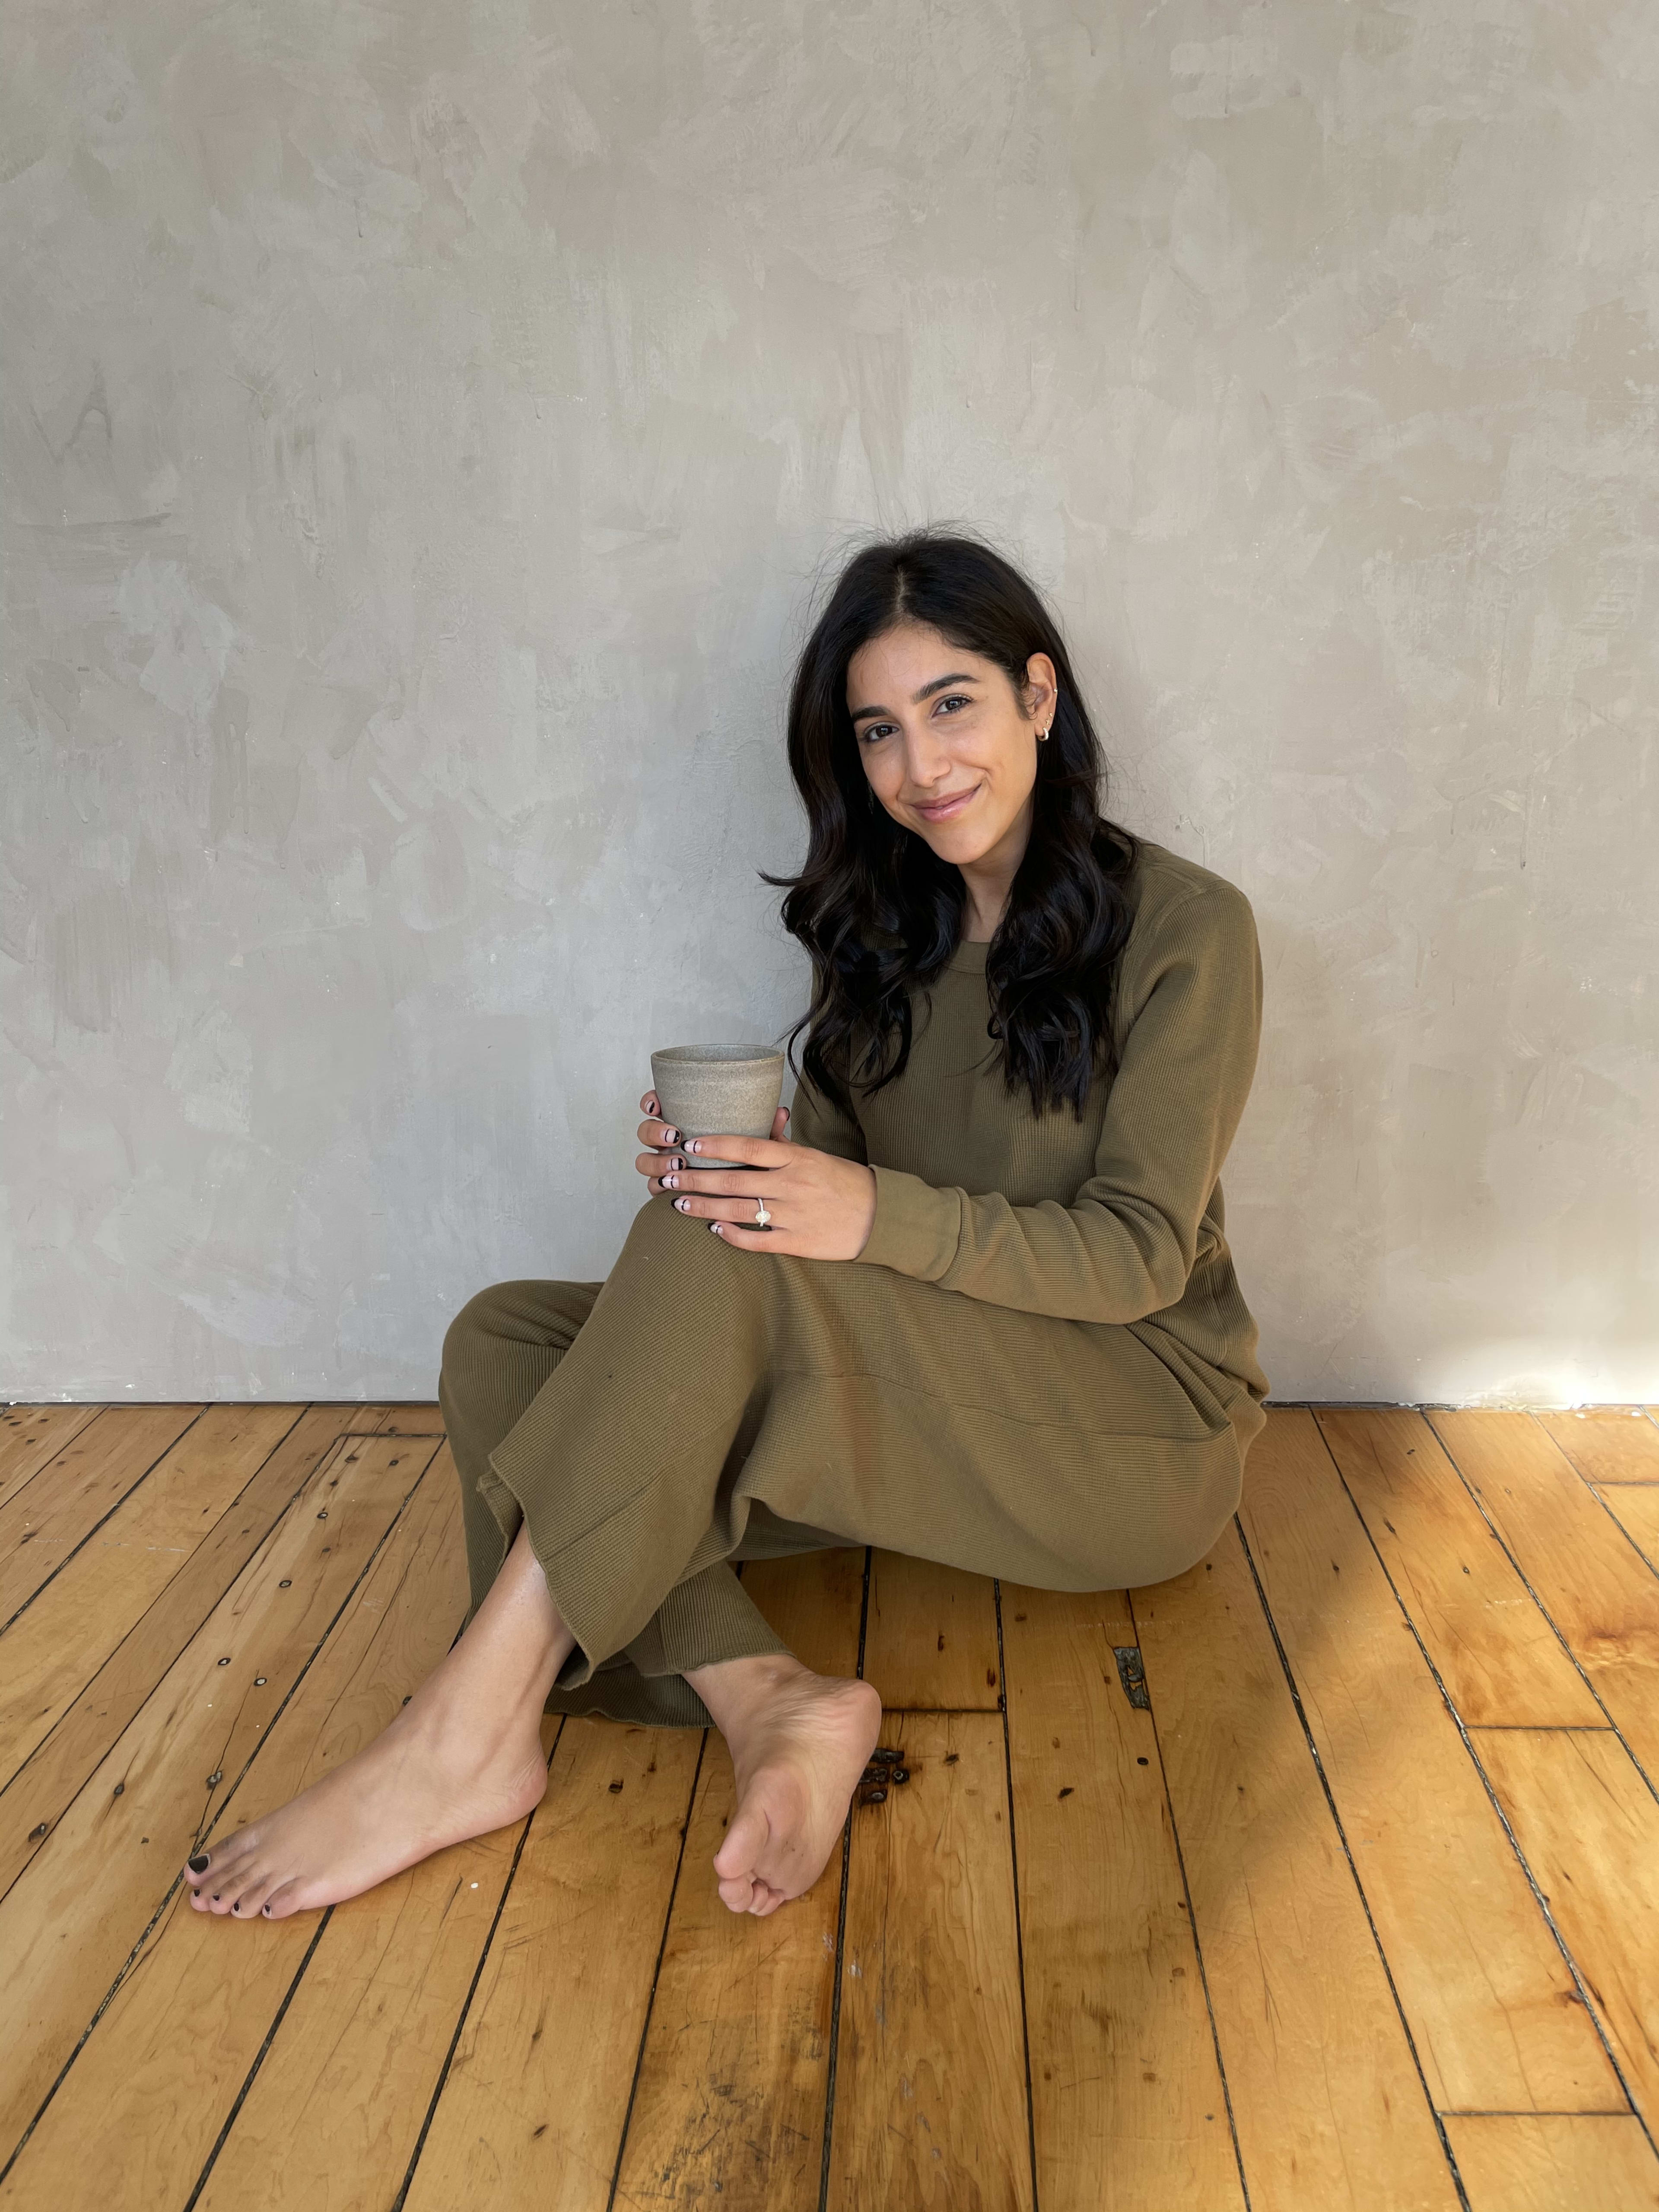 A rustic woman holding a cup against a grey wall during a photoshoot.